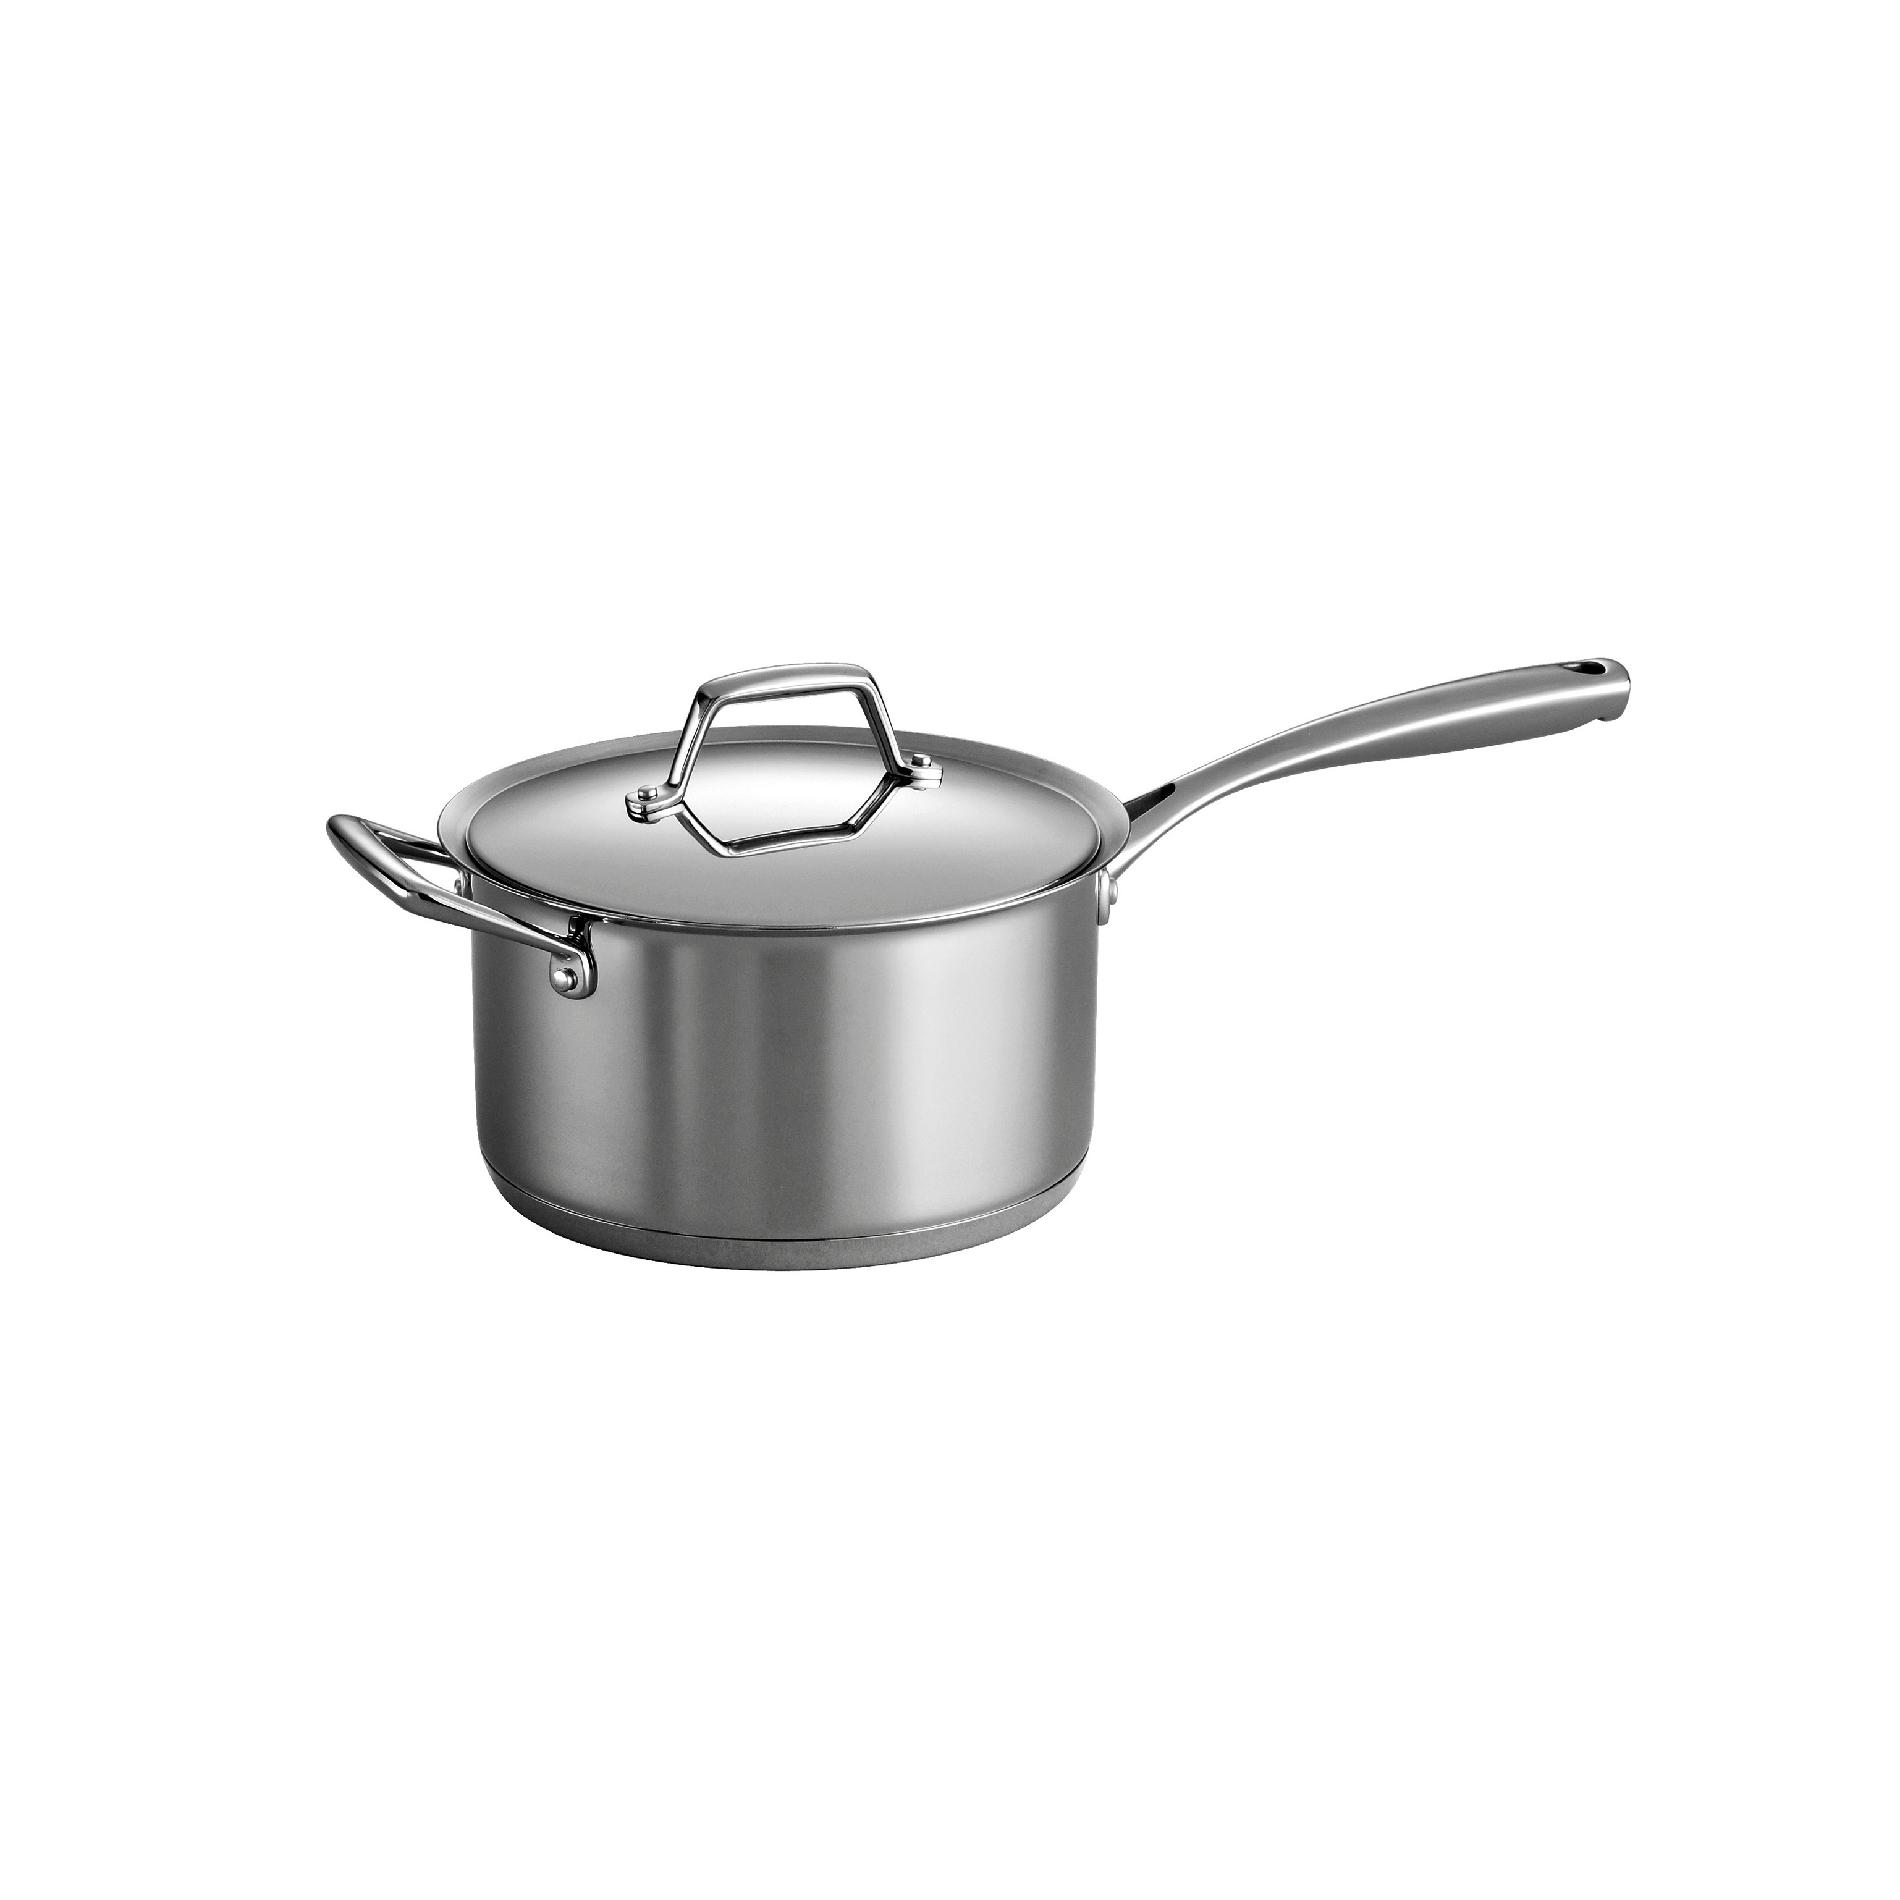 Gourmet Prima 18/10 Stainless Steel 4 Qt Covered Sauce Pan